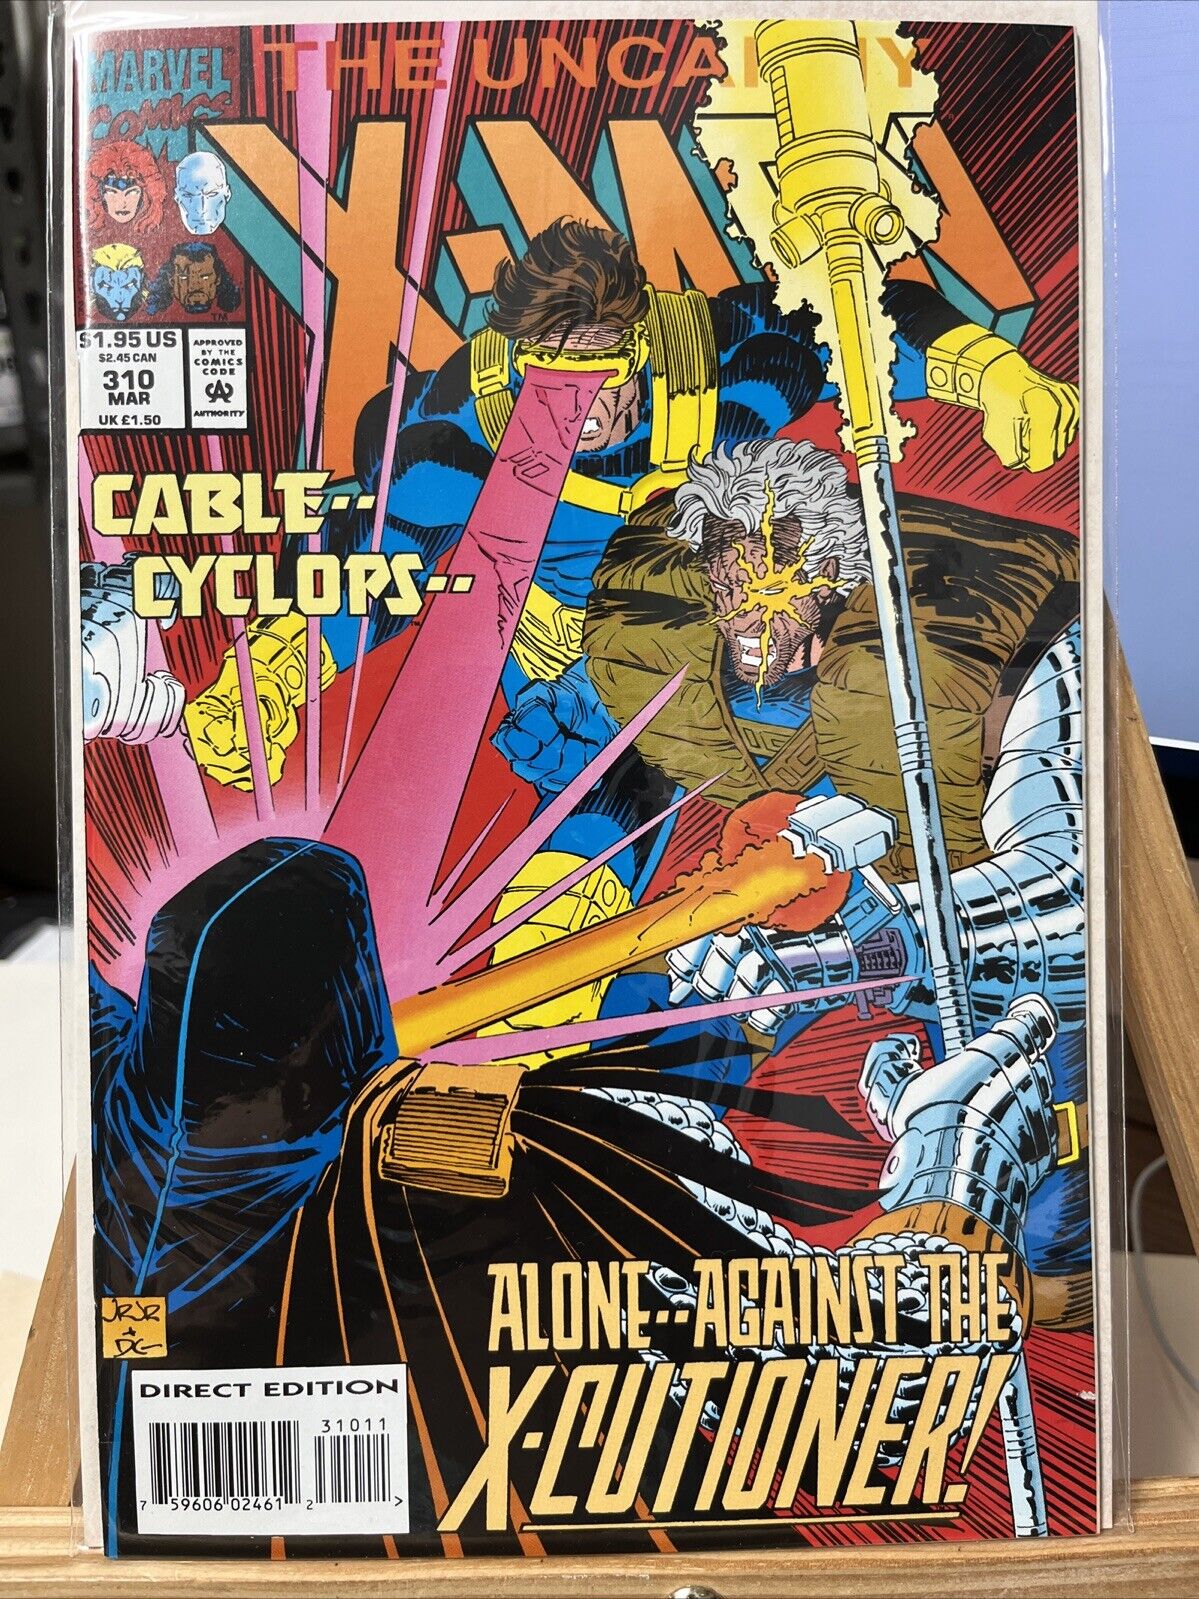 THE UNCANNY X-MEN, VOL.1 , #310 CABLE CYCLOPS, ALONE AGAINST THE X-CUTIONER1994